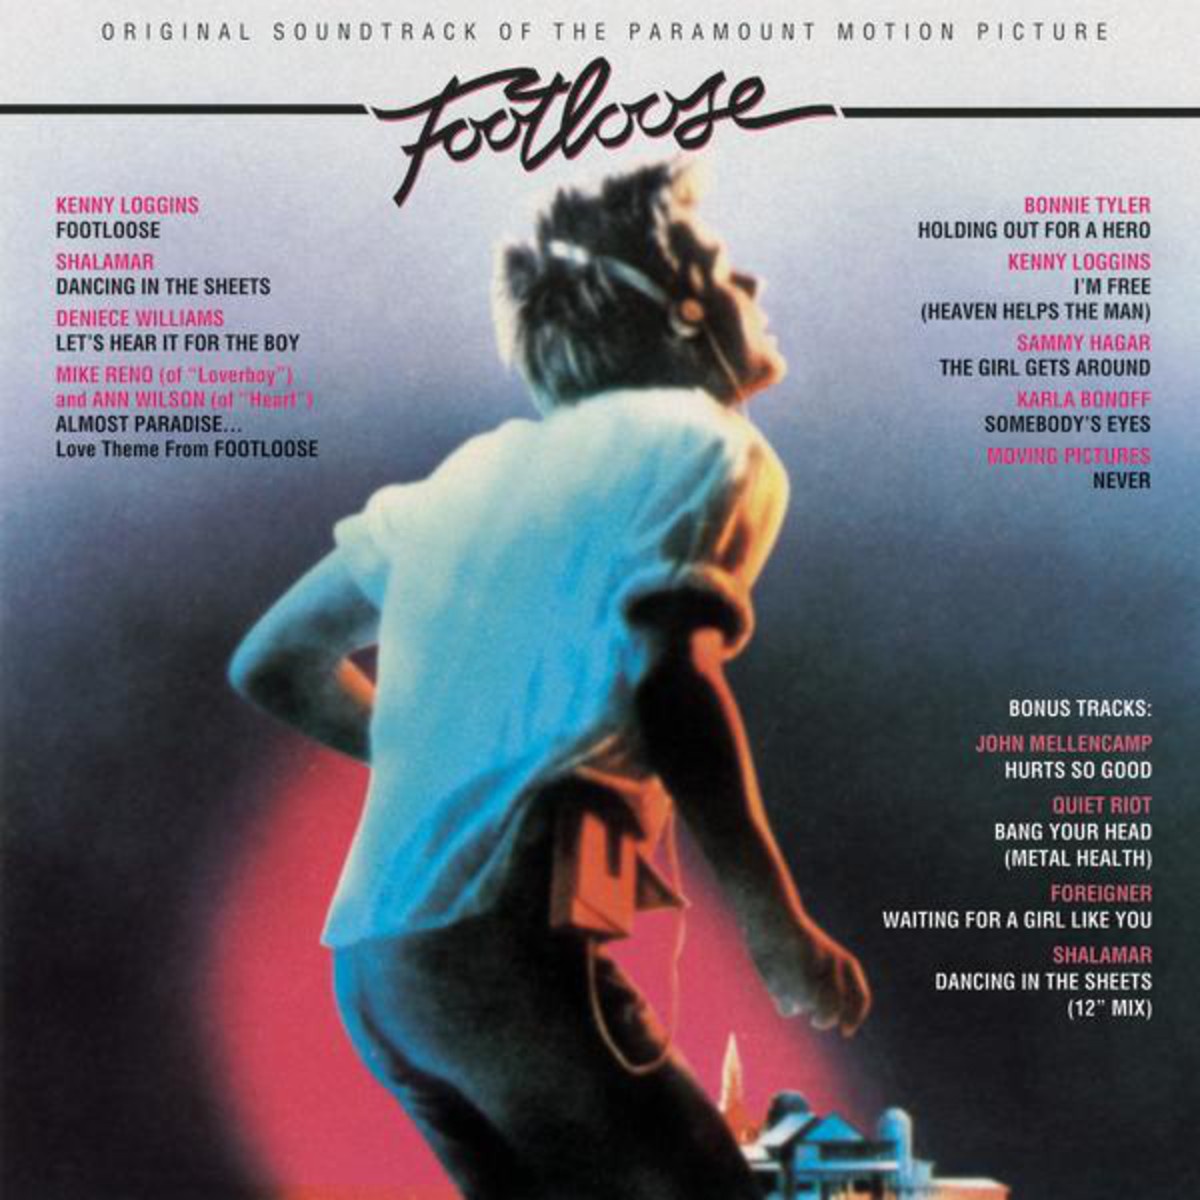 Almost Paradise (Love Theme "Footloose")